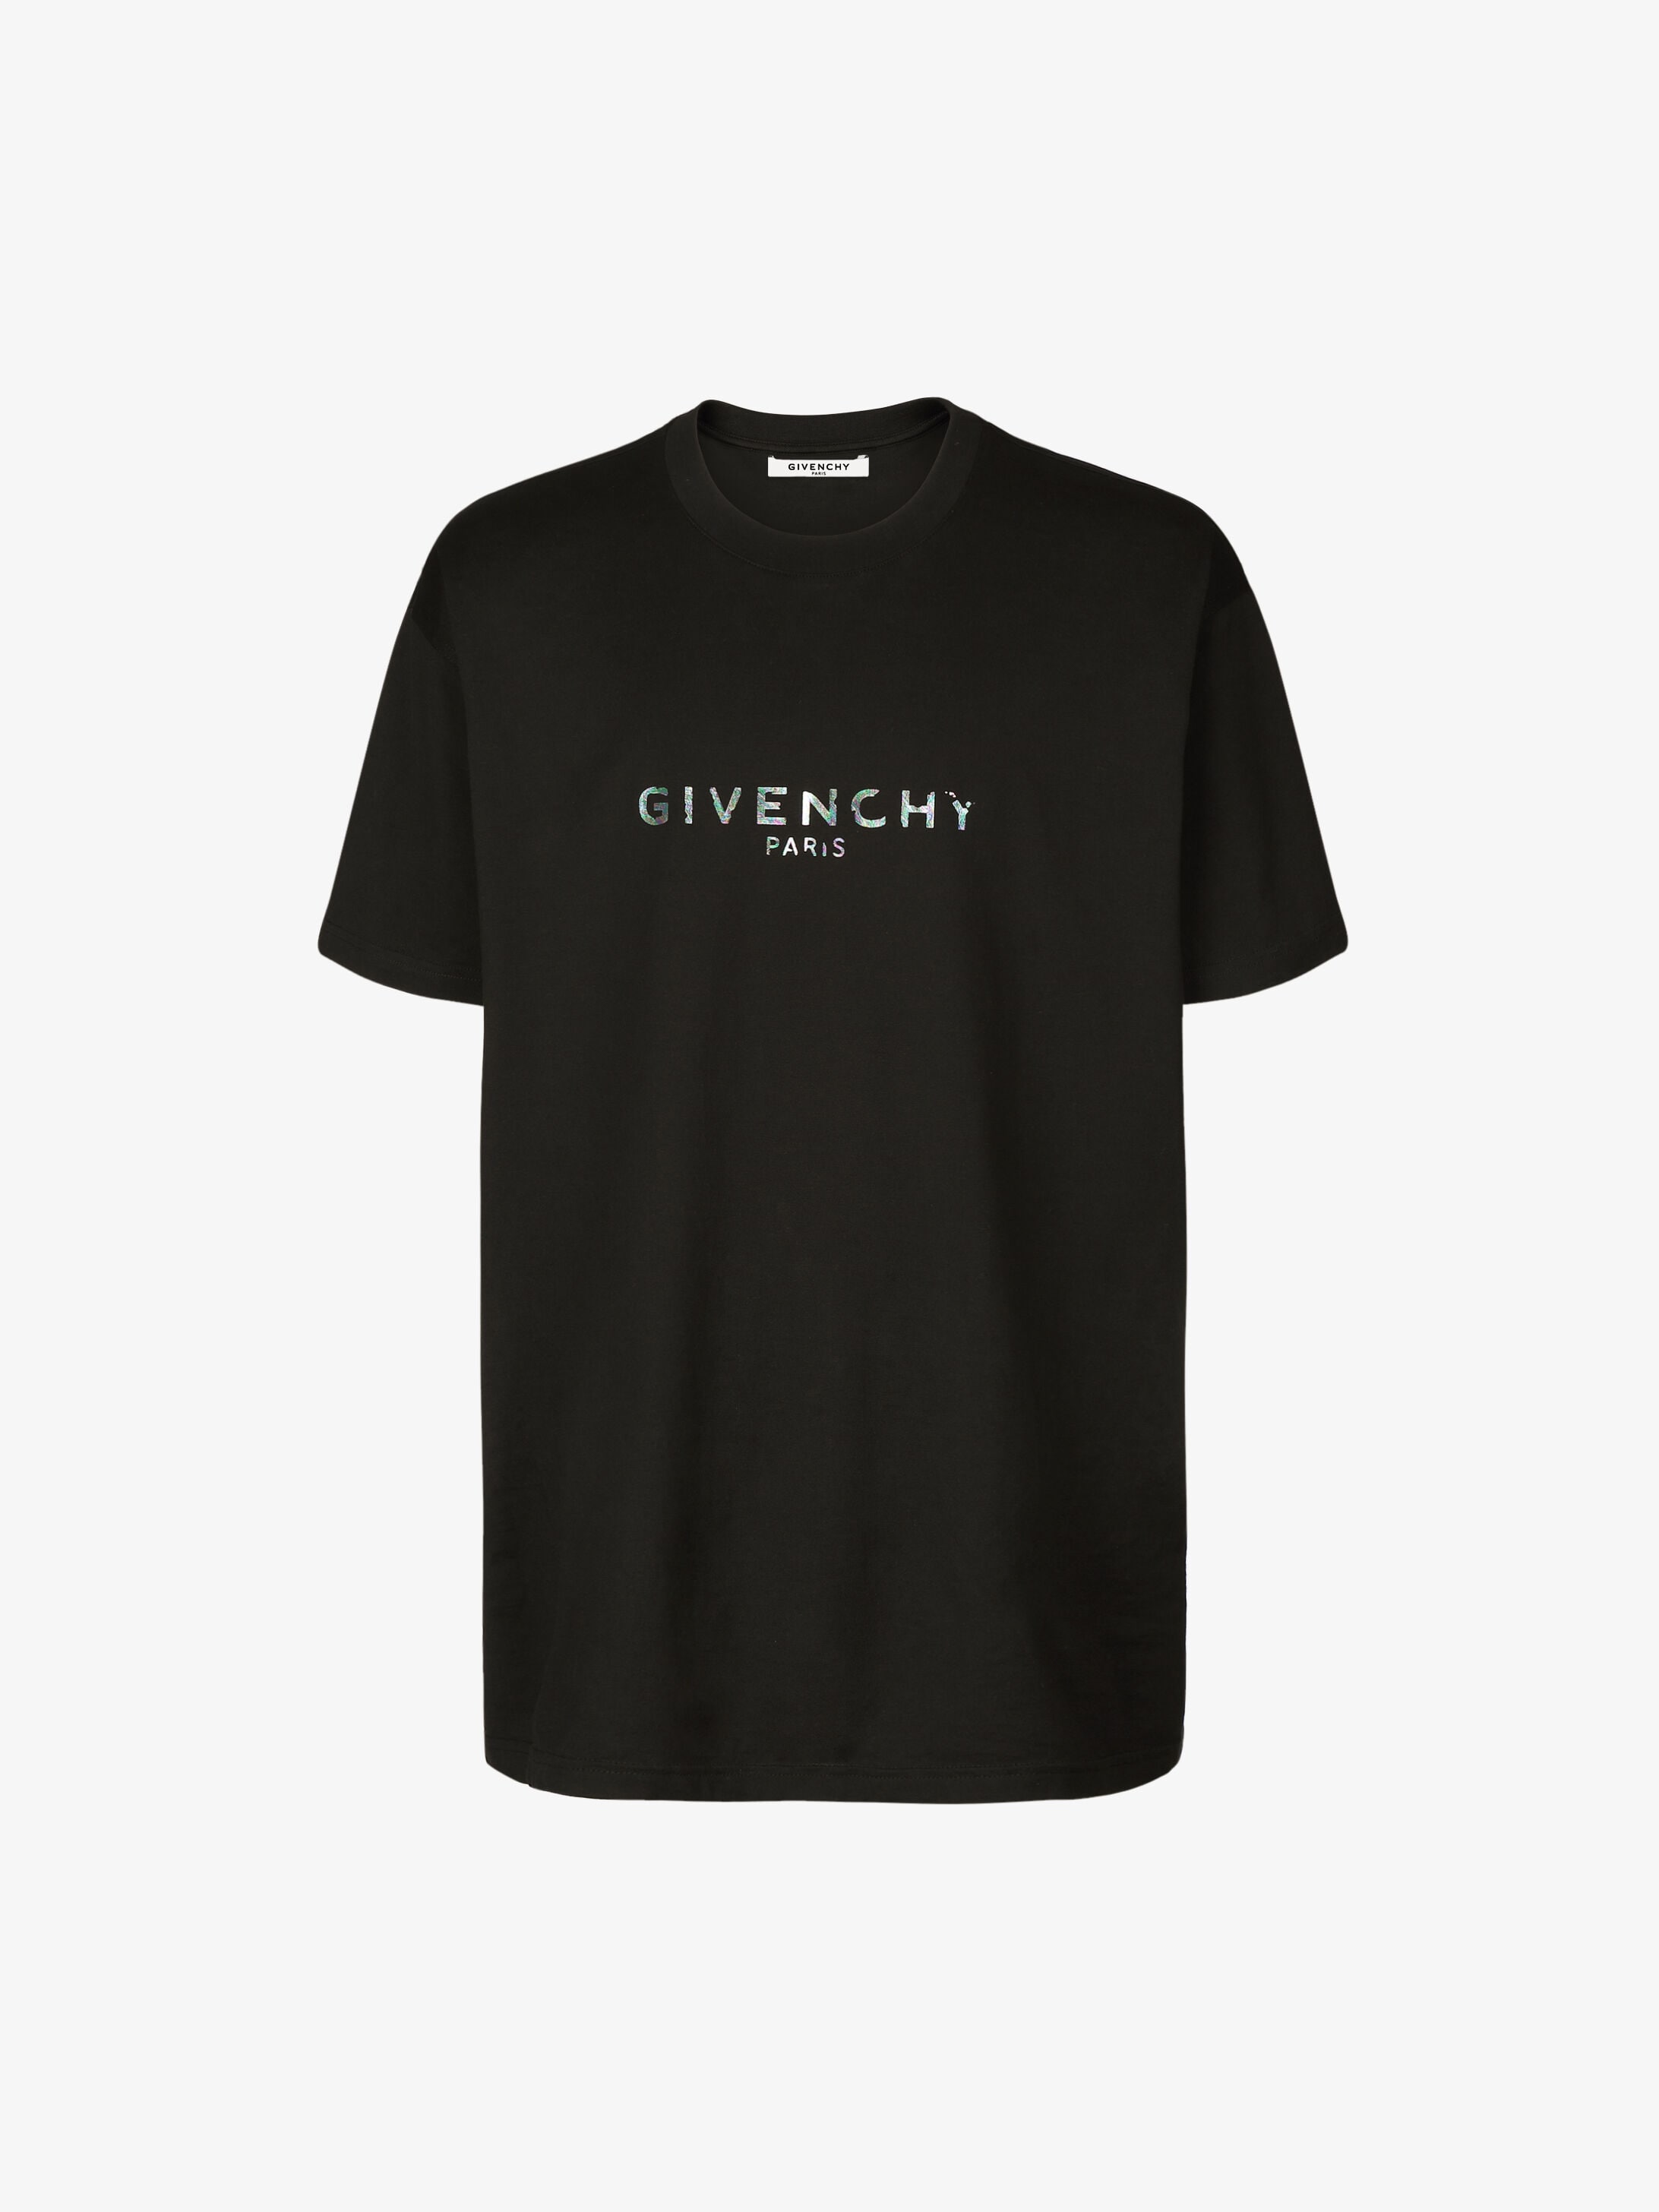 givenchy tee price